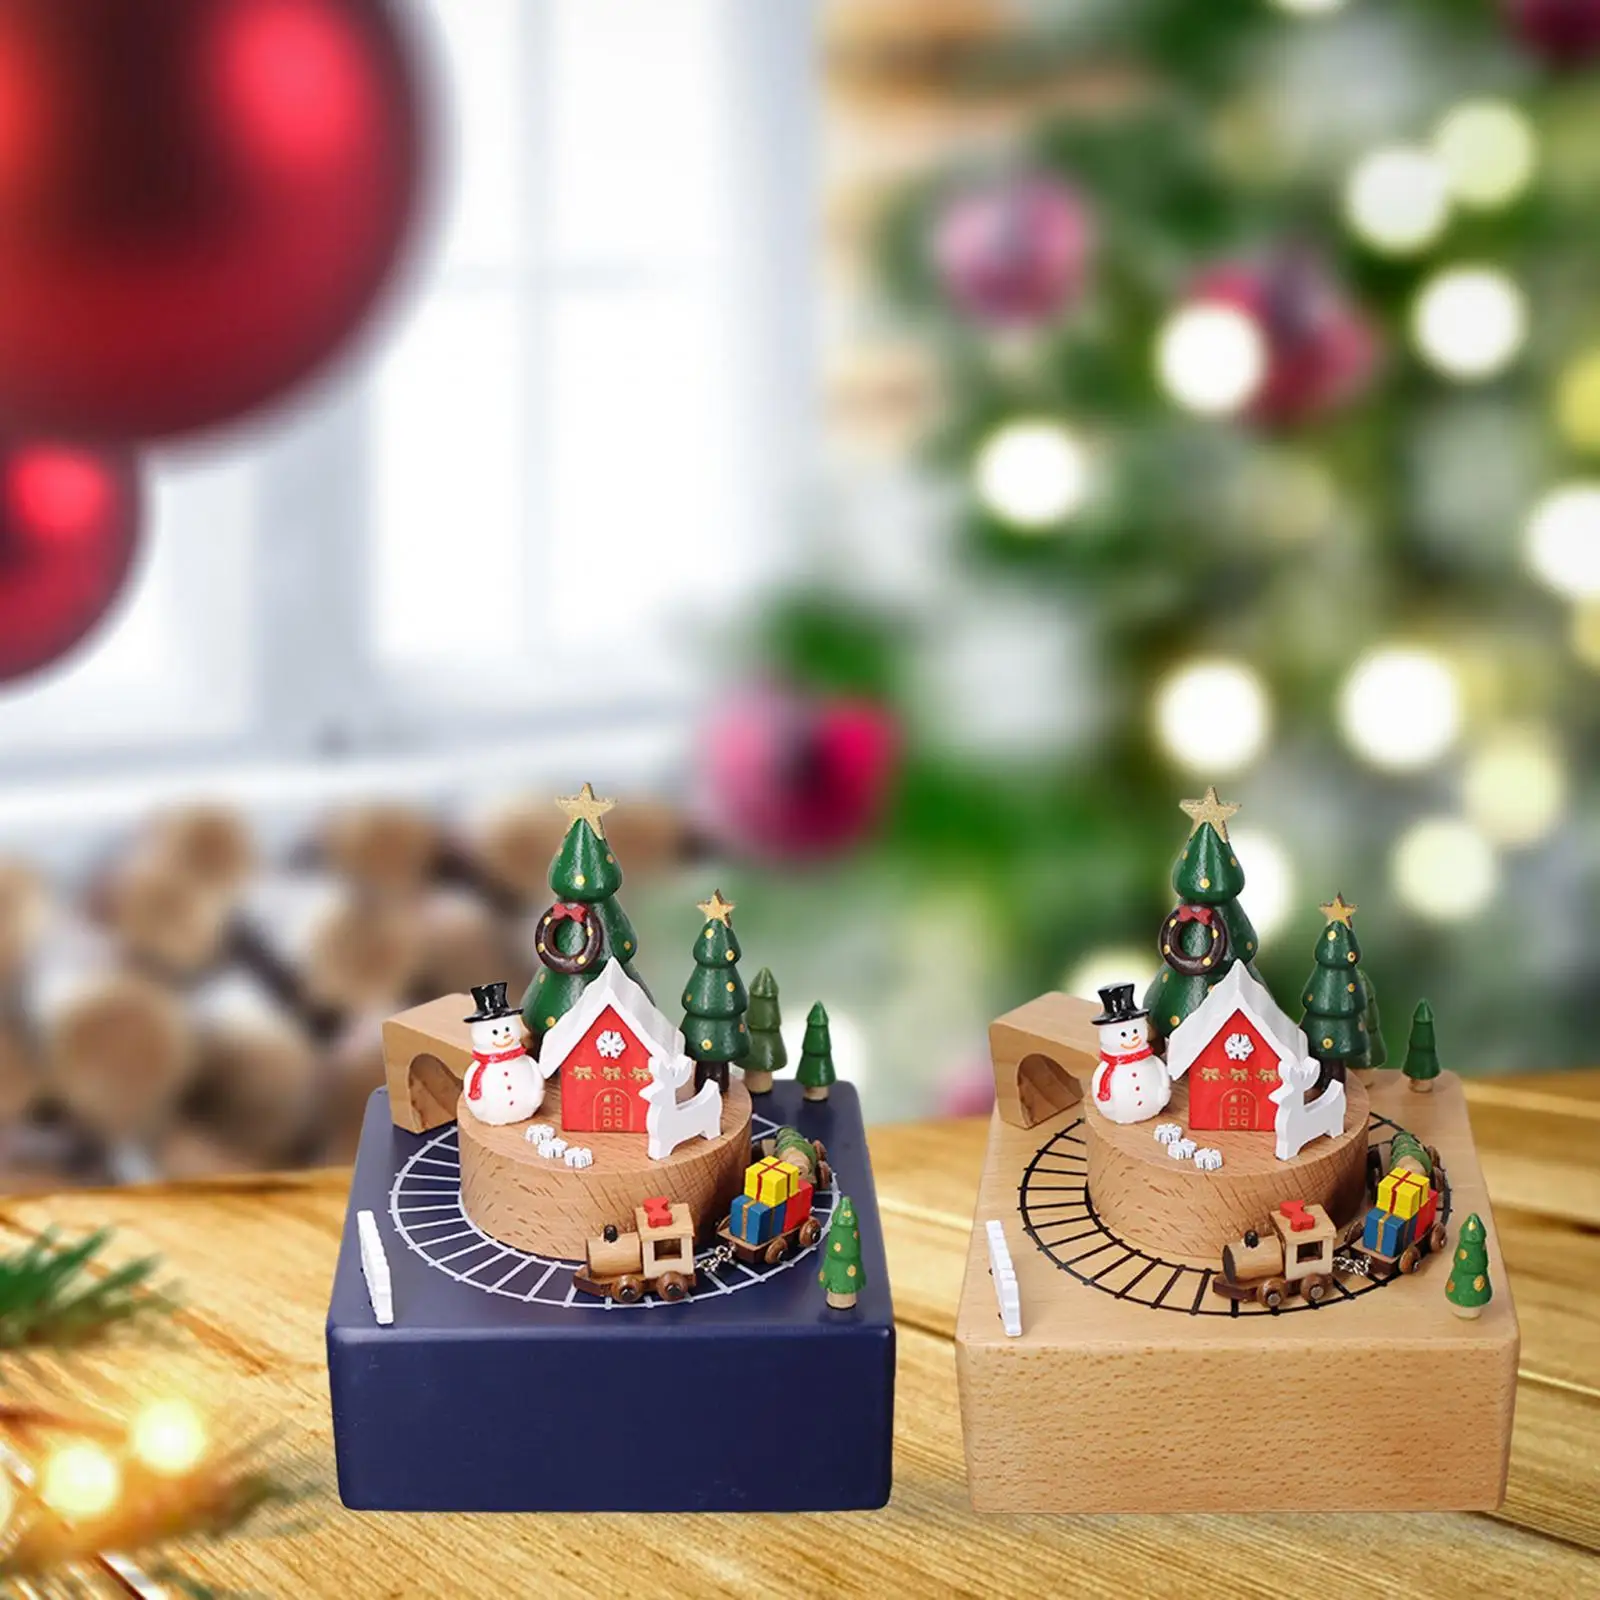 Christmas Wooden Musical Box with Revolving Trains Play Melody ``merry Christmas`` for Children Wife Girlfriend Friends Birthday